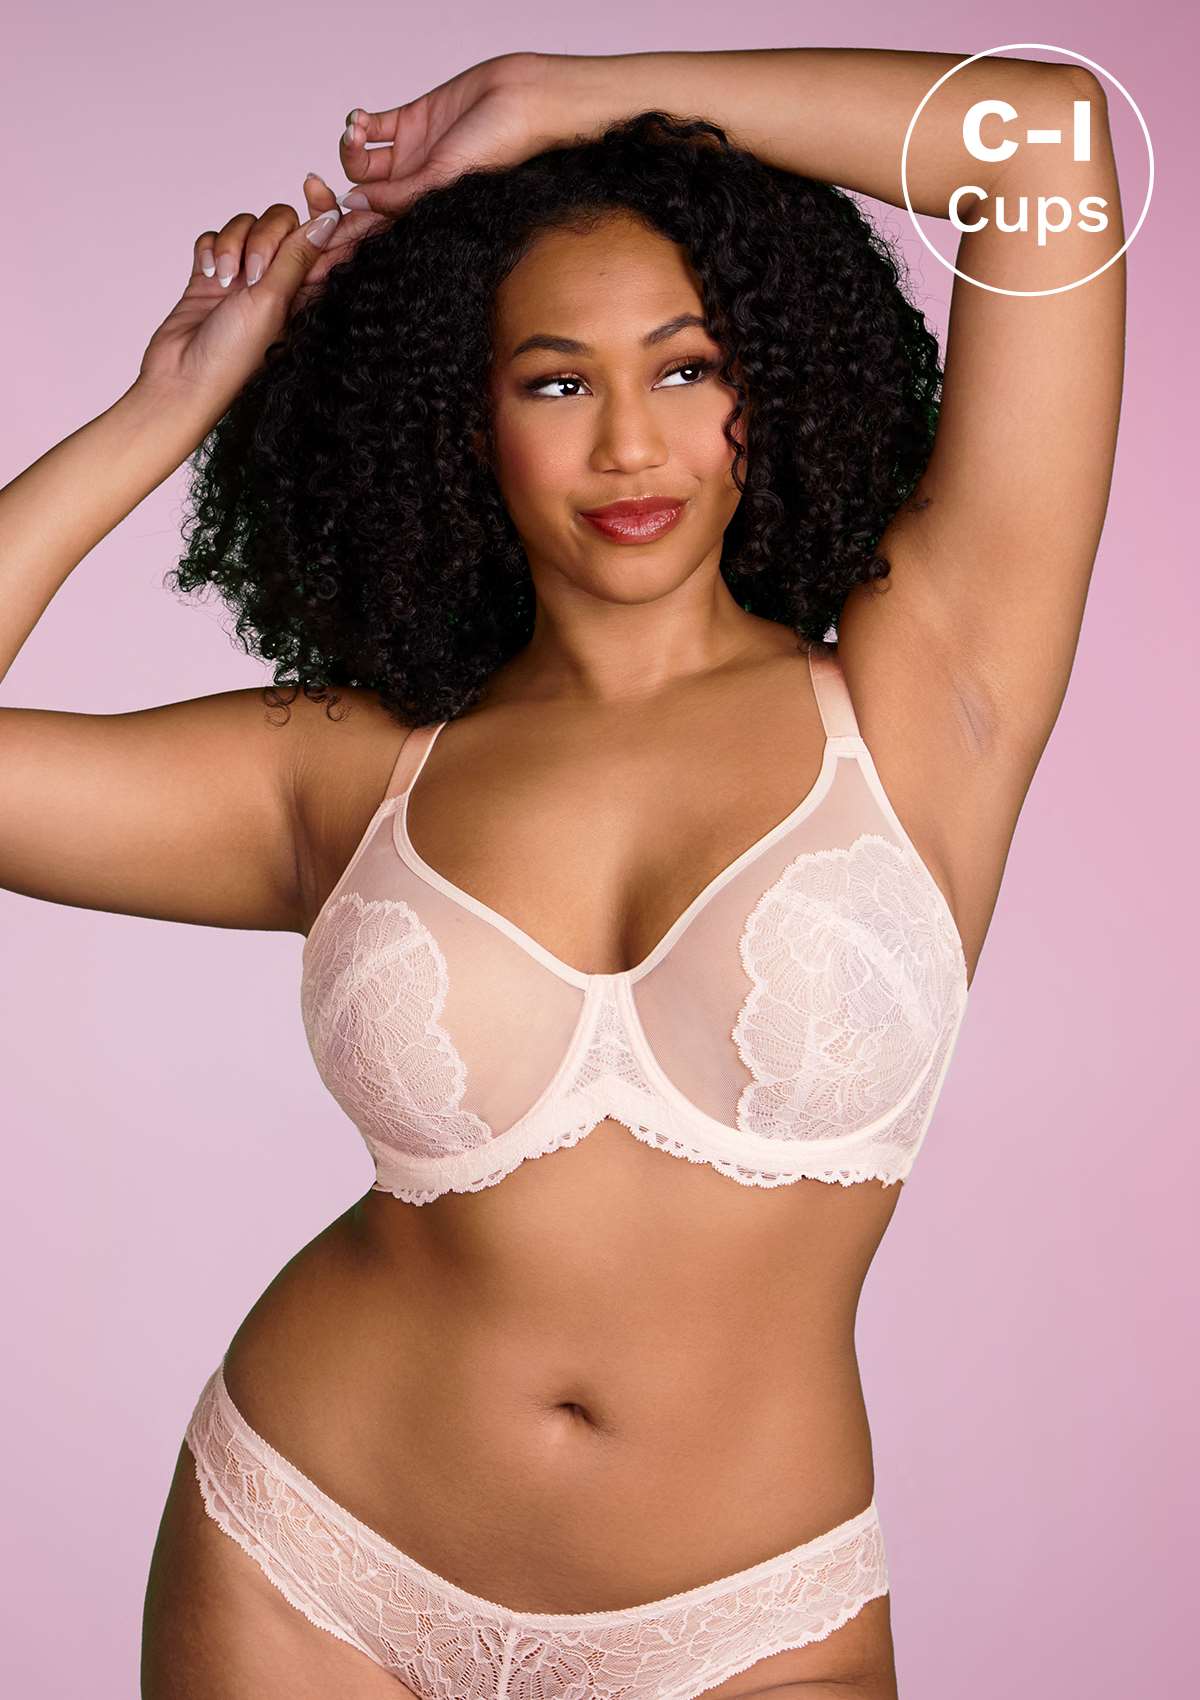 HSIA Blossom Sheer Lace Bra: Comfortable Underwire Bra For Big Busts - White / 38 / H